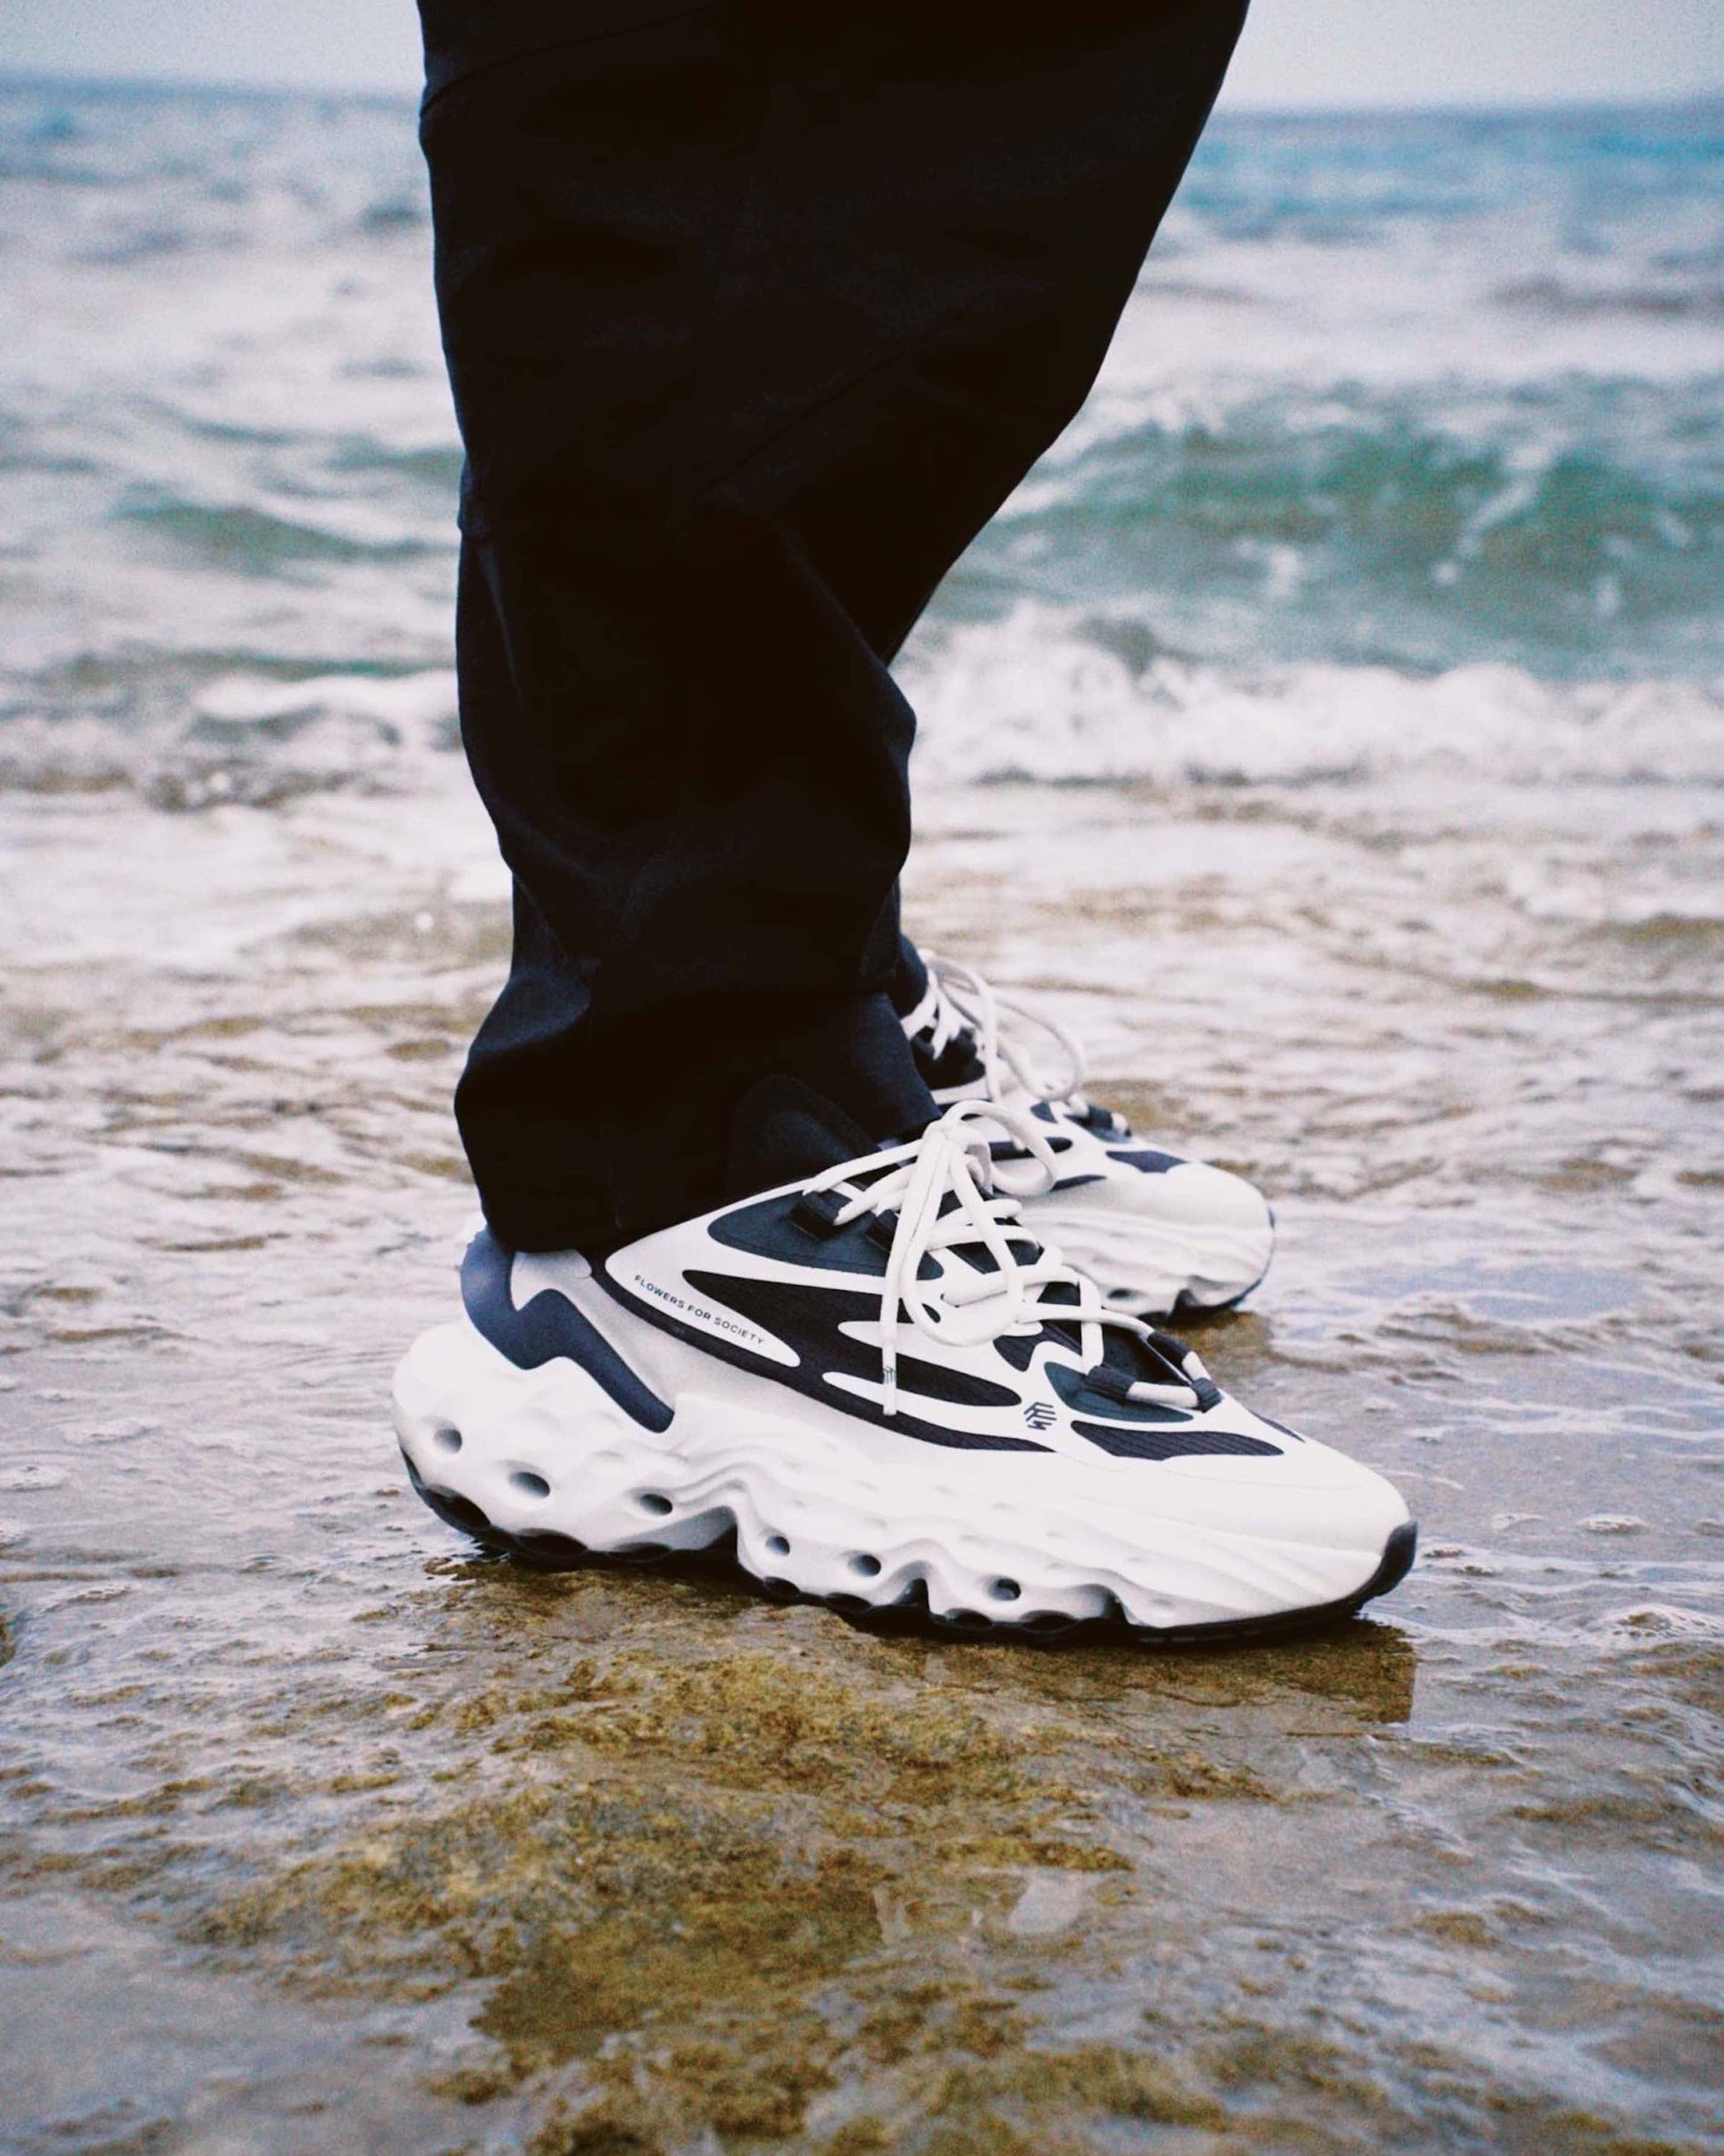 Flowers For Society Sneaker Seed.One Orca black white lateral worn by model standing in shallow water